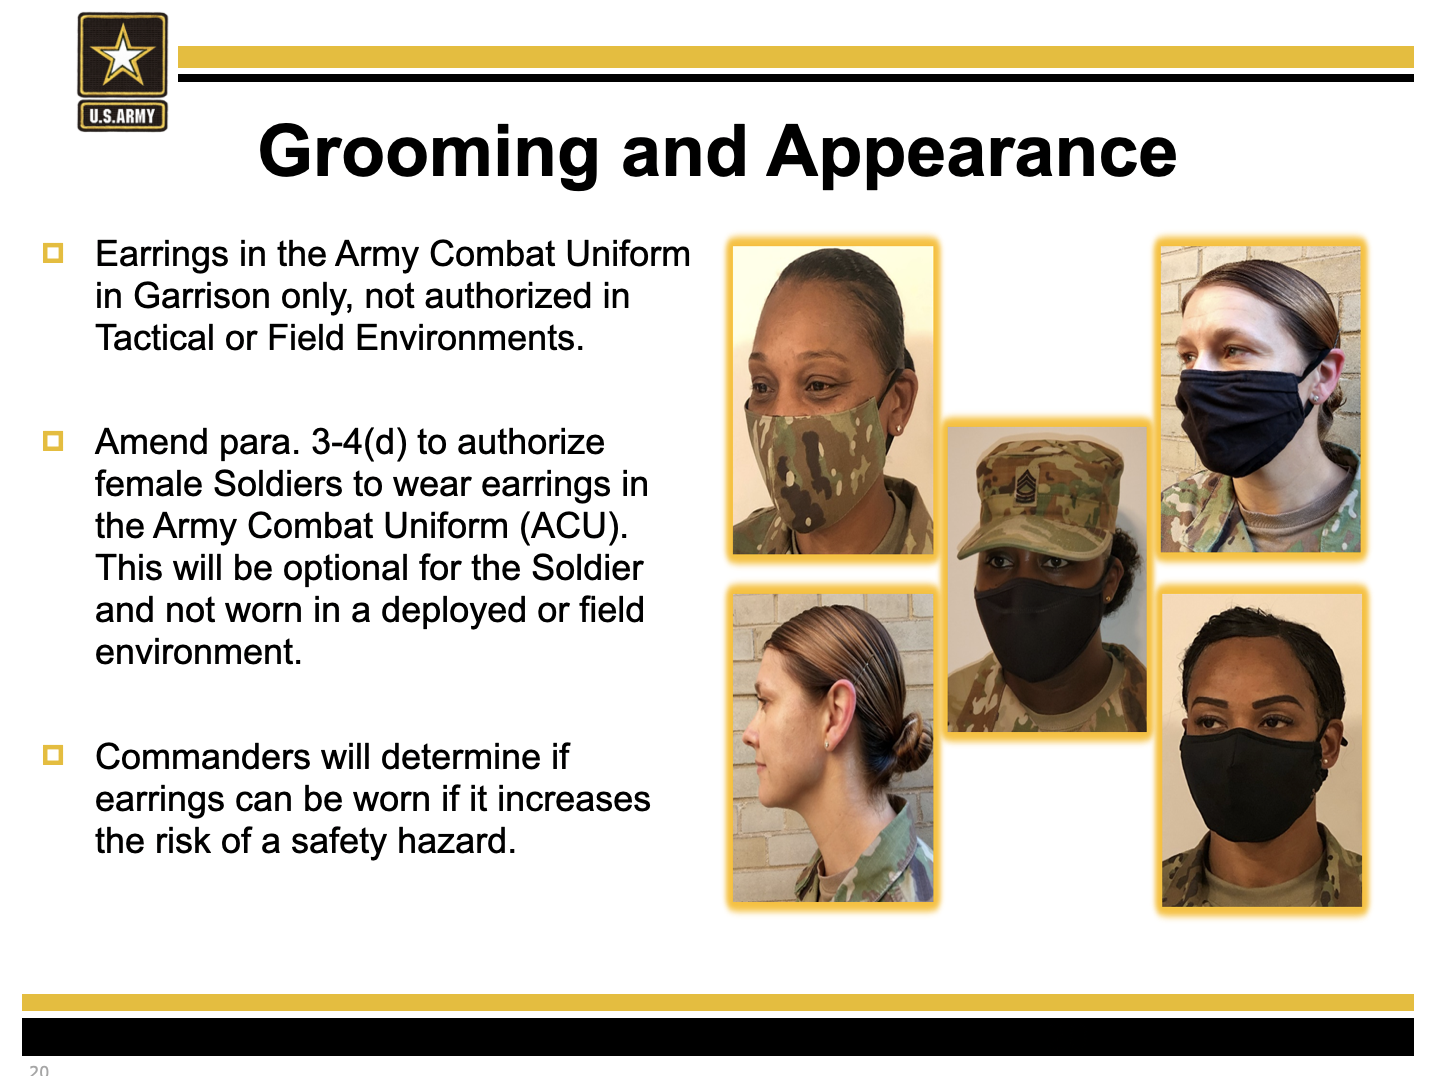 AR 6701 Army Leaders to Announce Hair Regulation Changes in 2021